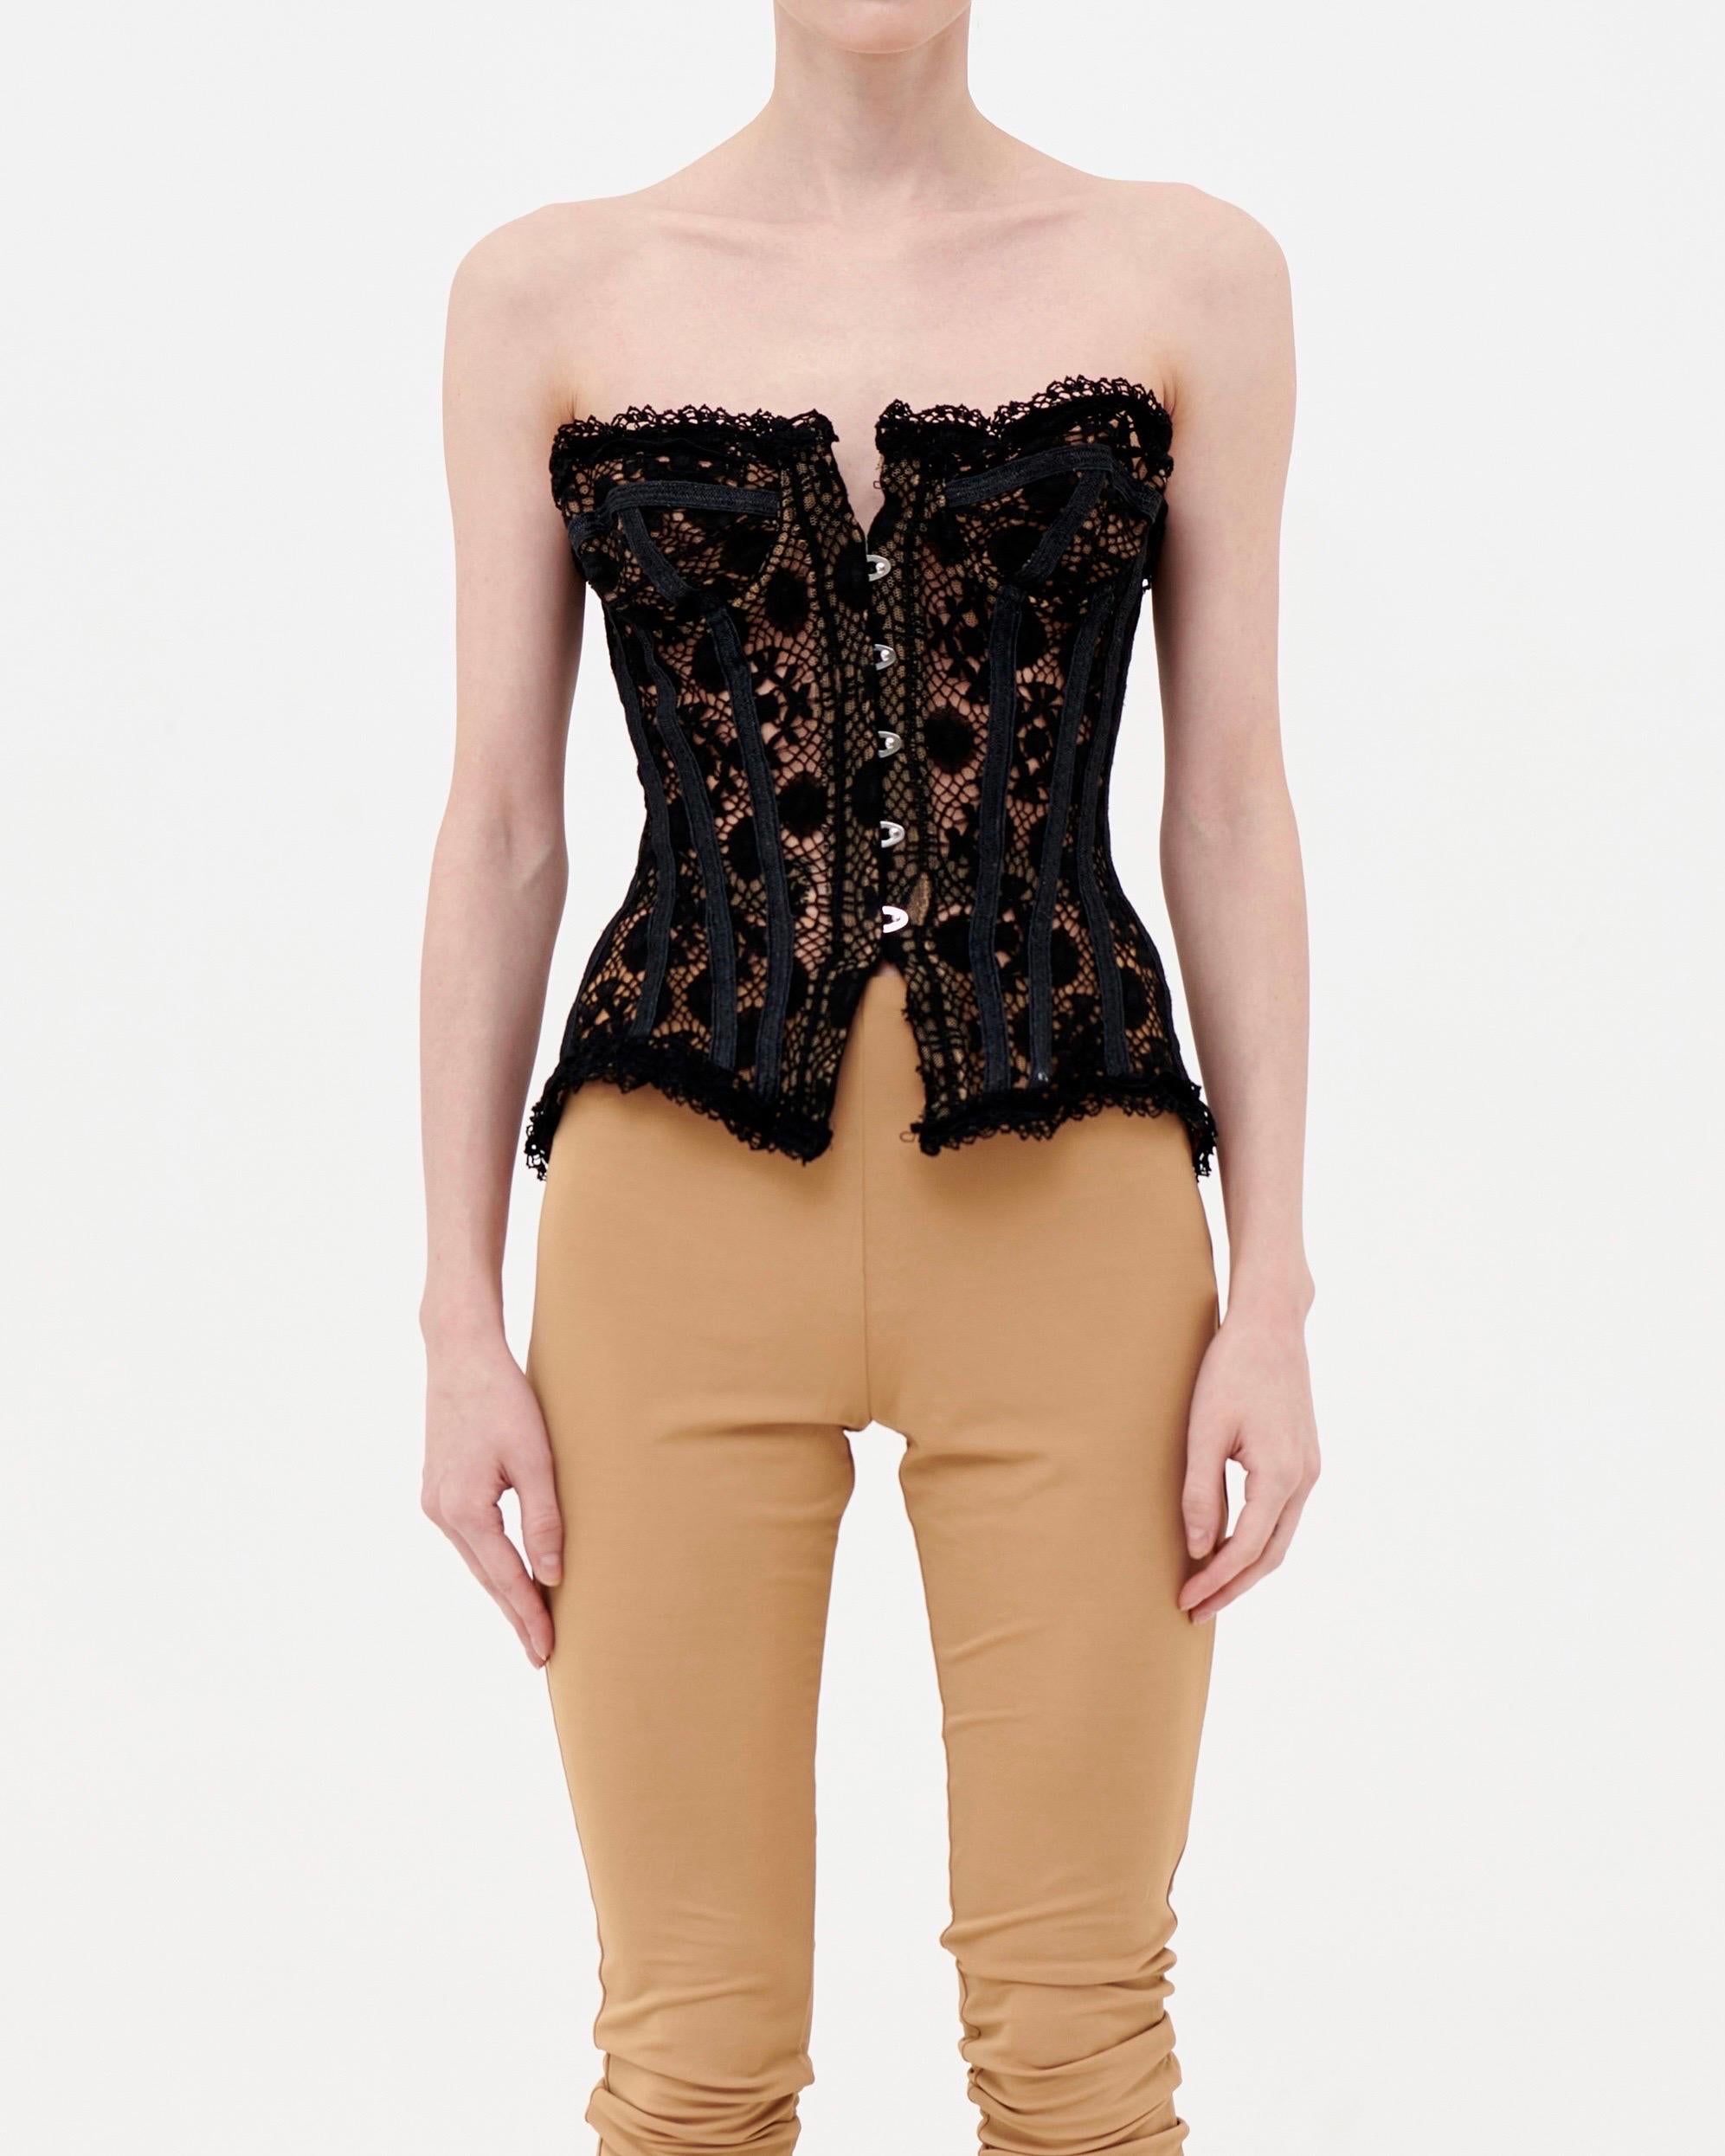 • Sheer black lace corset top
• Nude mesh lining
• Front hook closure
• Back lace-up fastening
• Runway piece